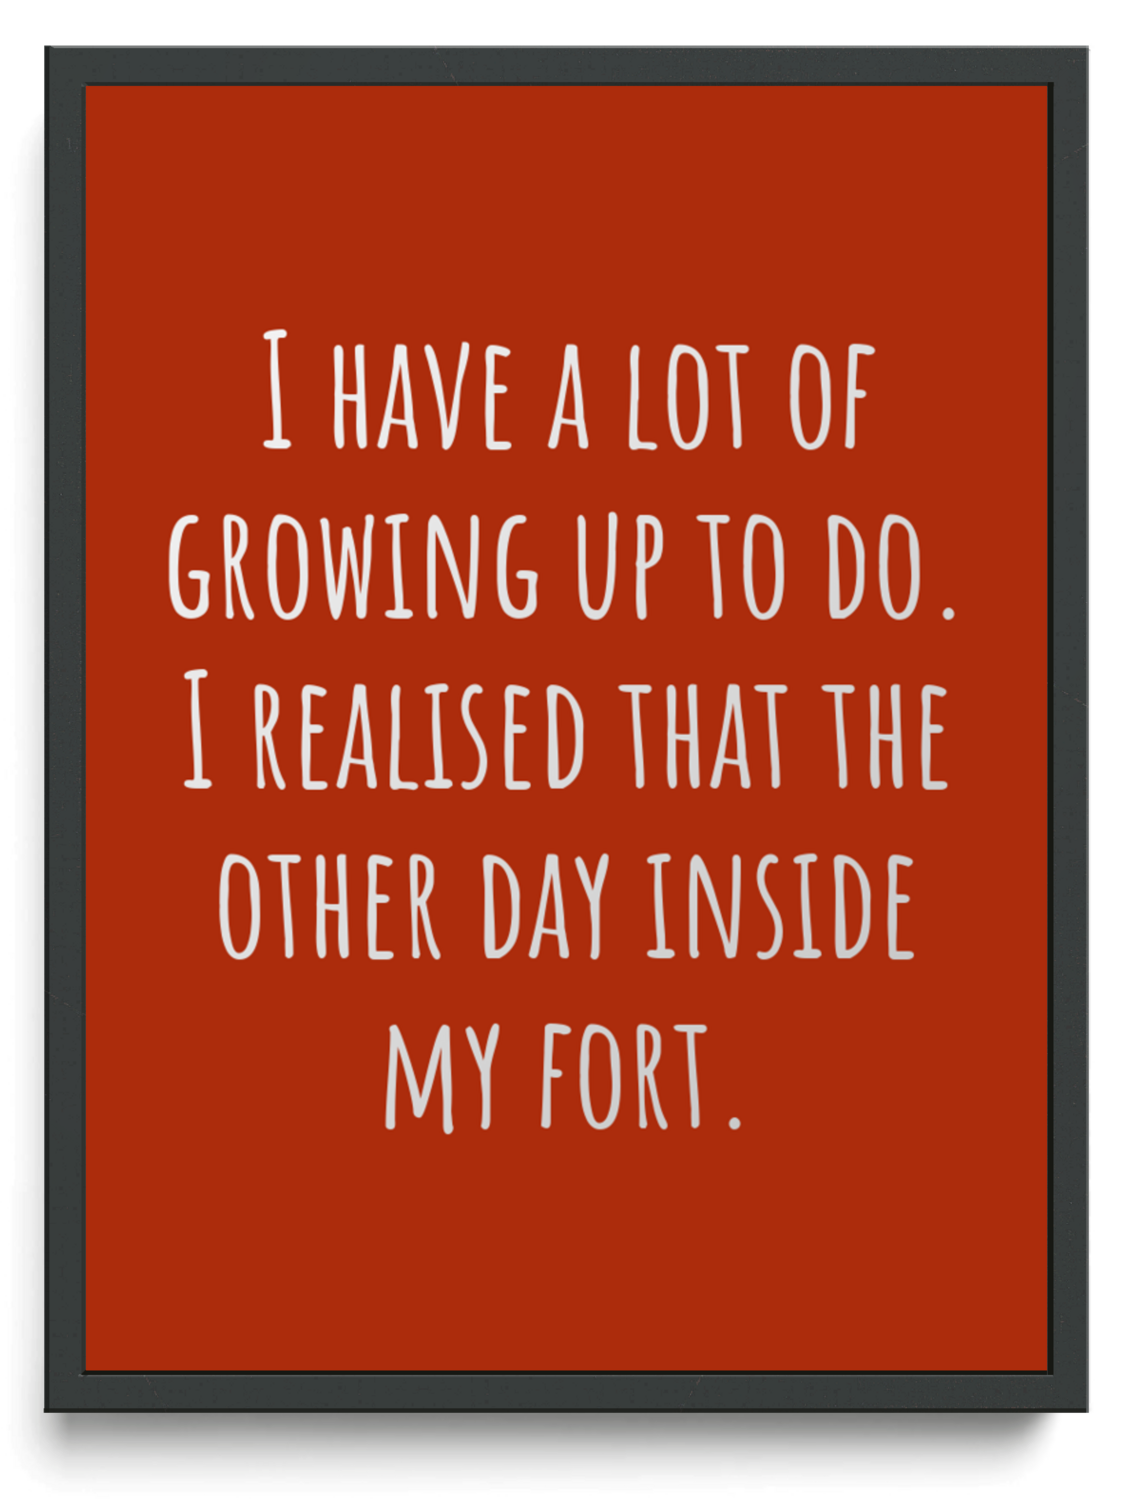 I have a lot of growing up to do I realised that the other day inside my fort framed typographic print